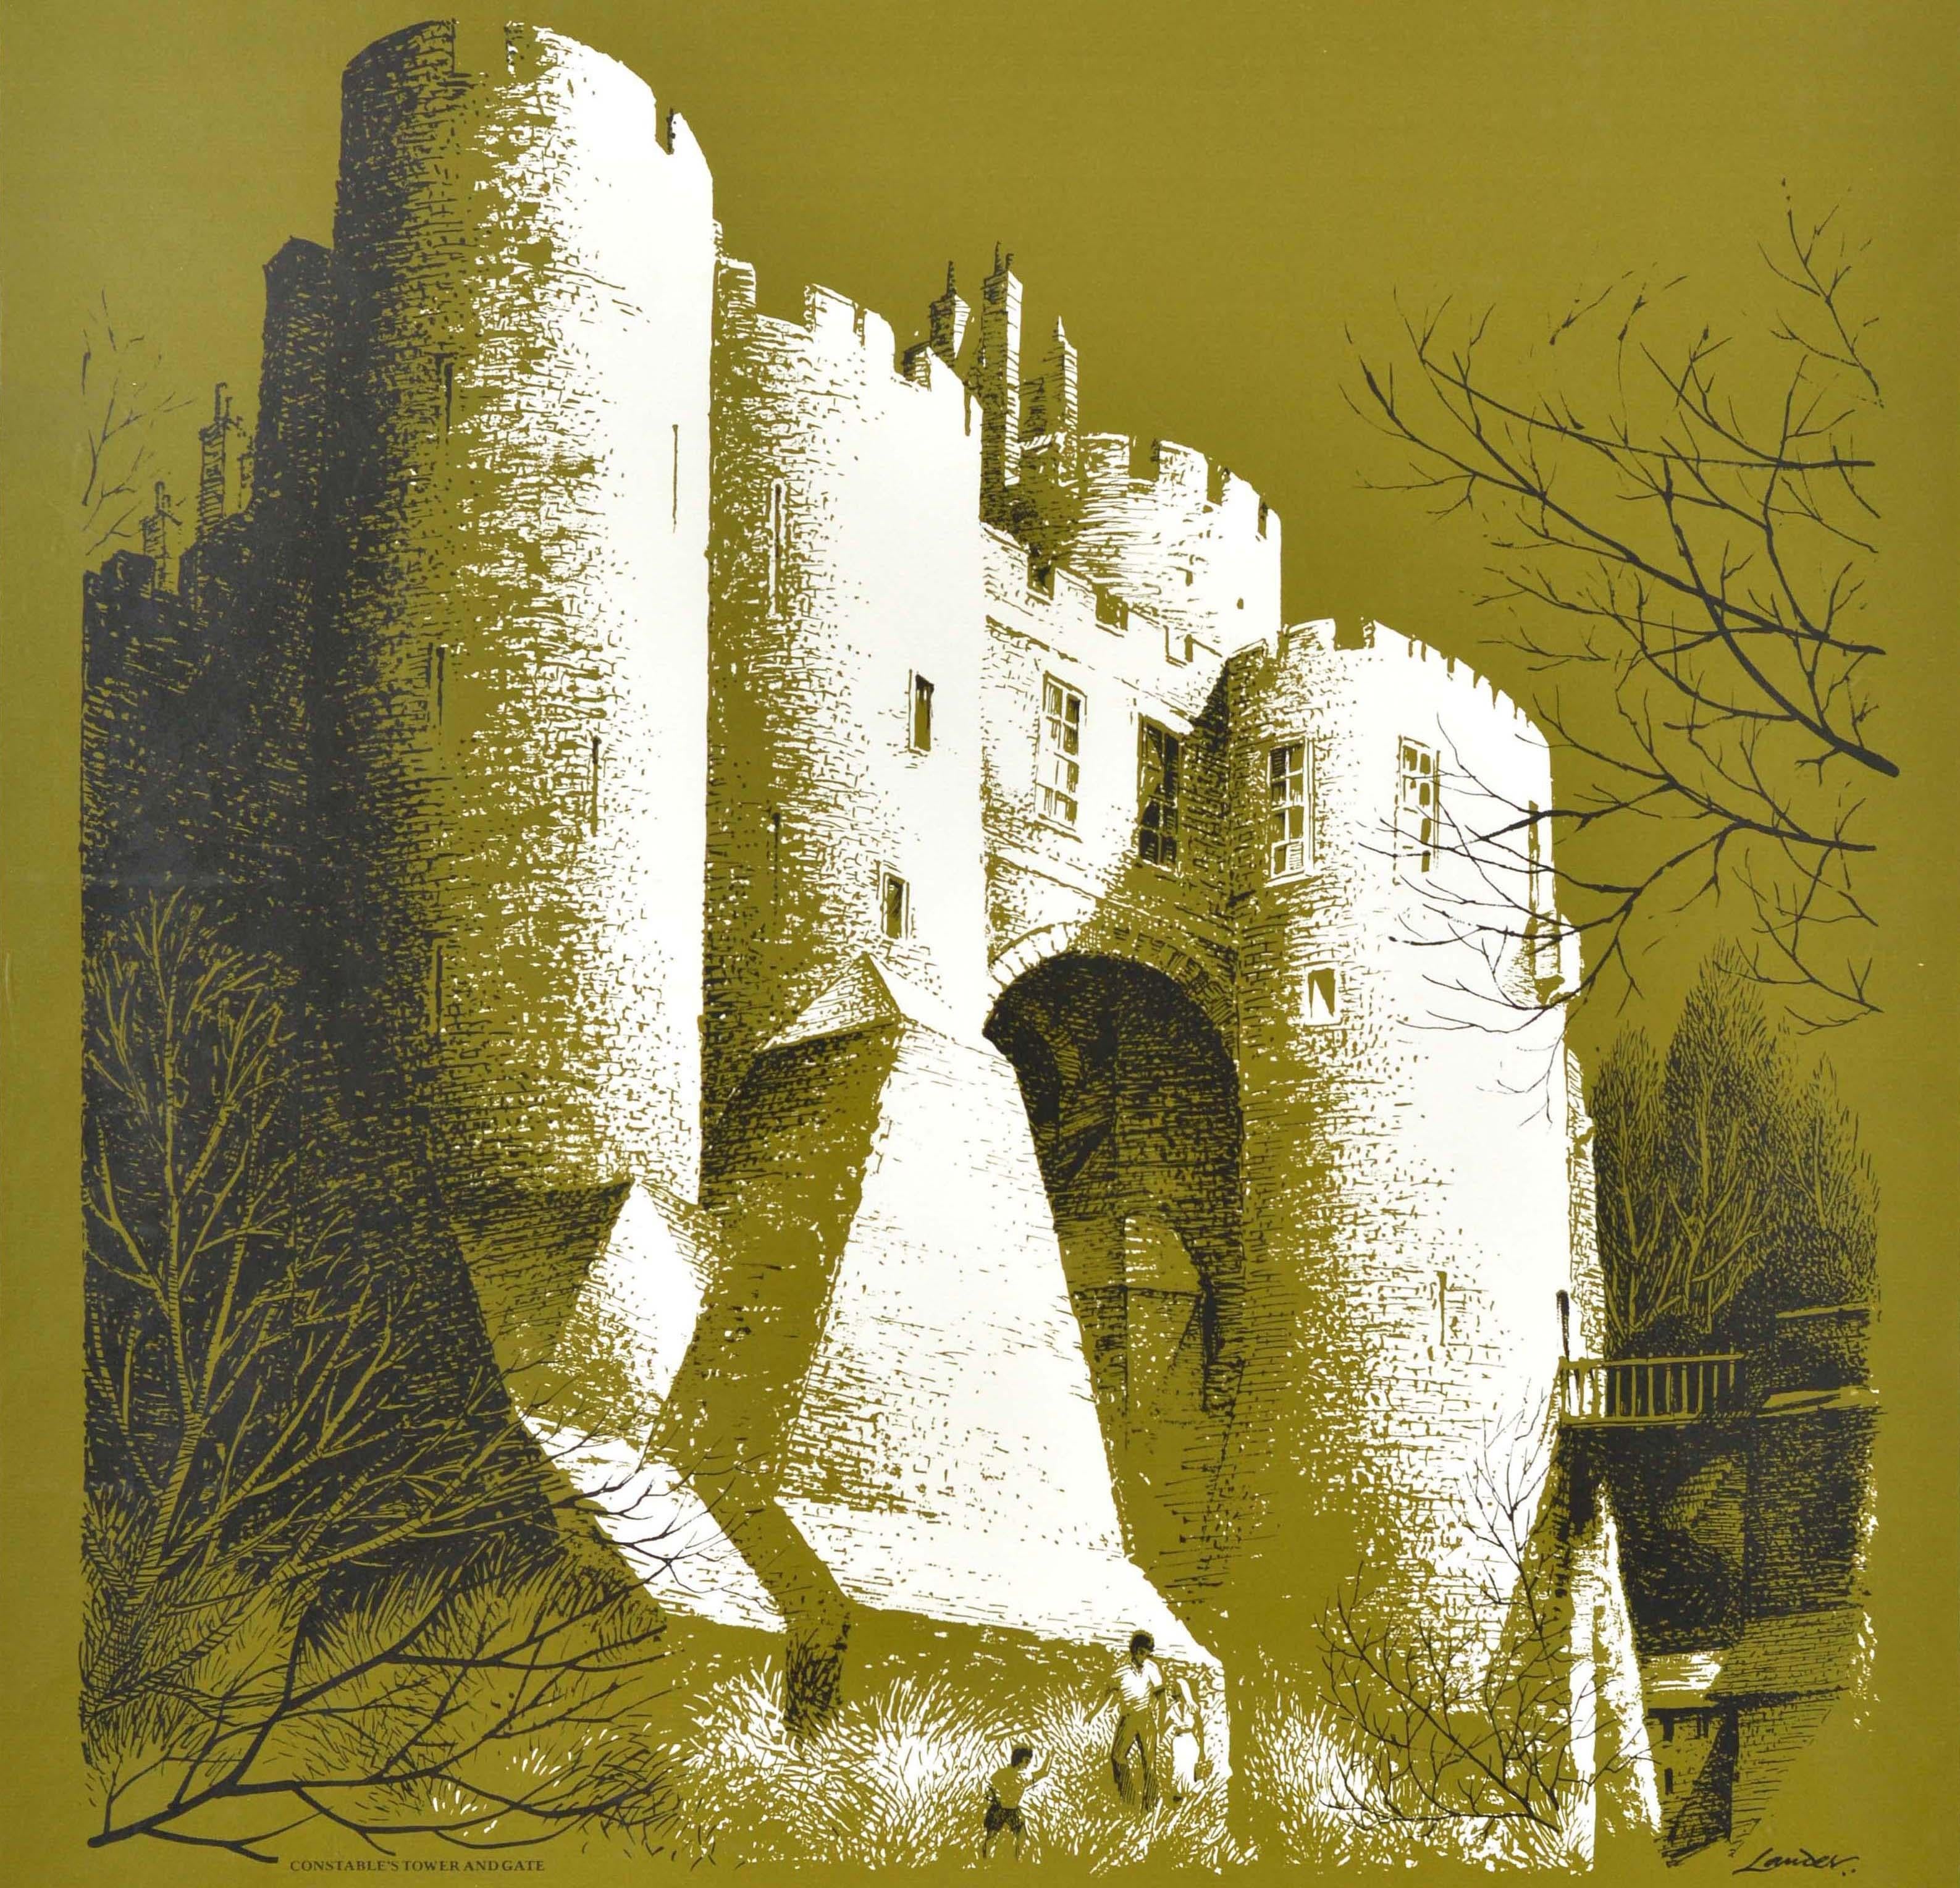 Original vintage train travel poster - Visit Dover Castle - featuring artwork by the notable commercial artist and poster designer Reginald Montague Lander (1913-1980) depicting a family walking around the historic Constable's Tower and Gate of the